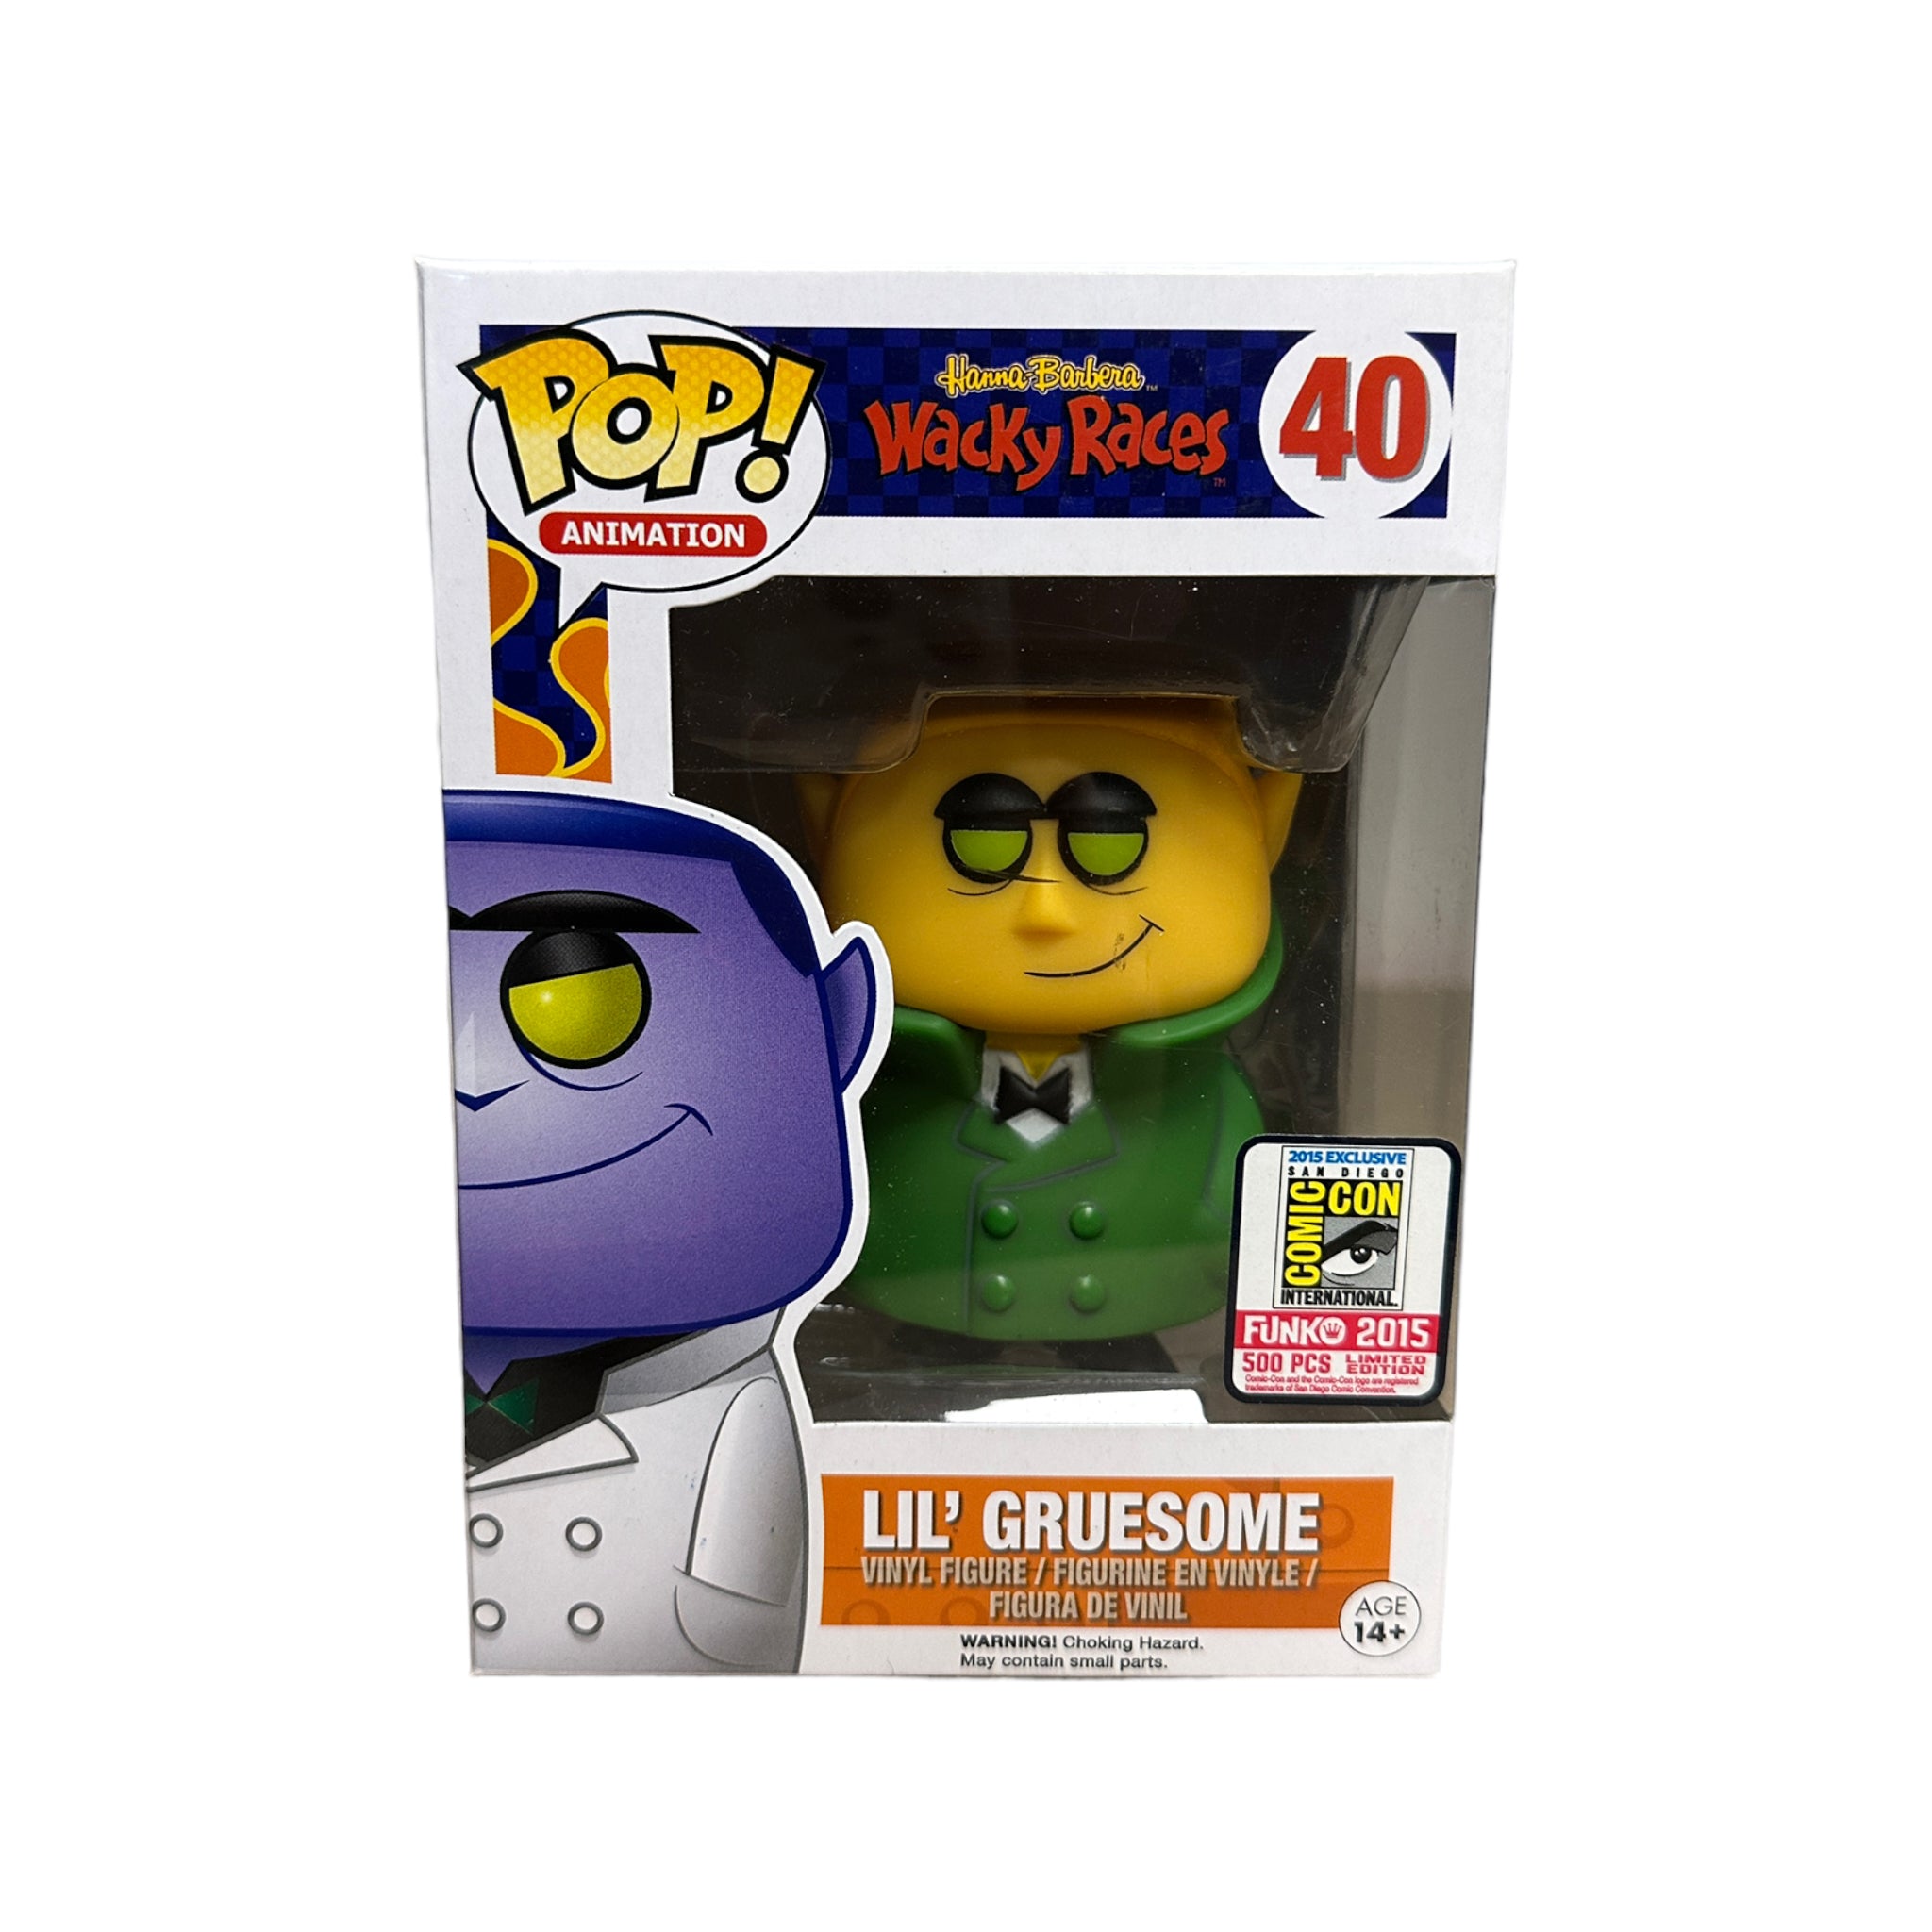 Lil' Gruesome #40 (Yellow) Funko Pop! - Wacky Races - SDCC 2015 Exclusive LE500 Pcs - Condition 8.5/10